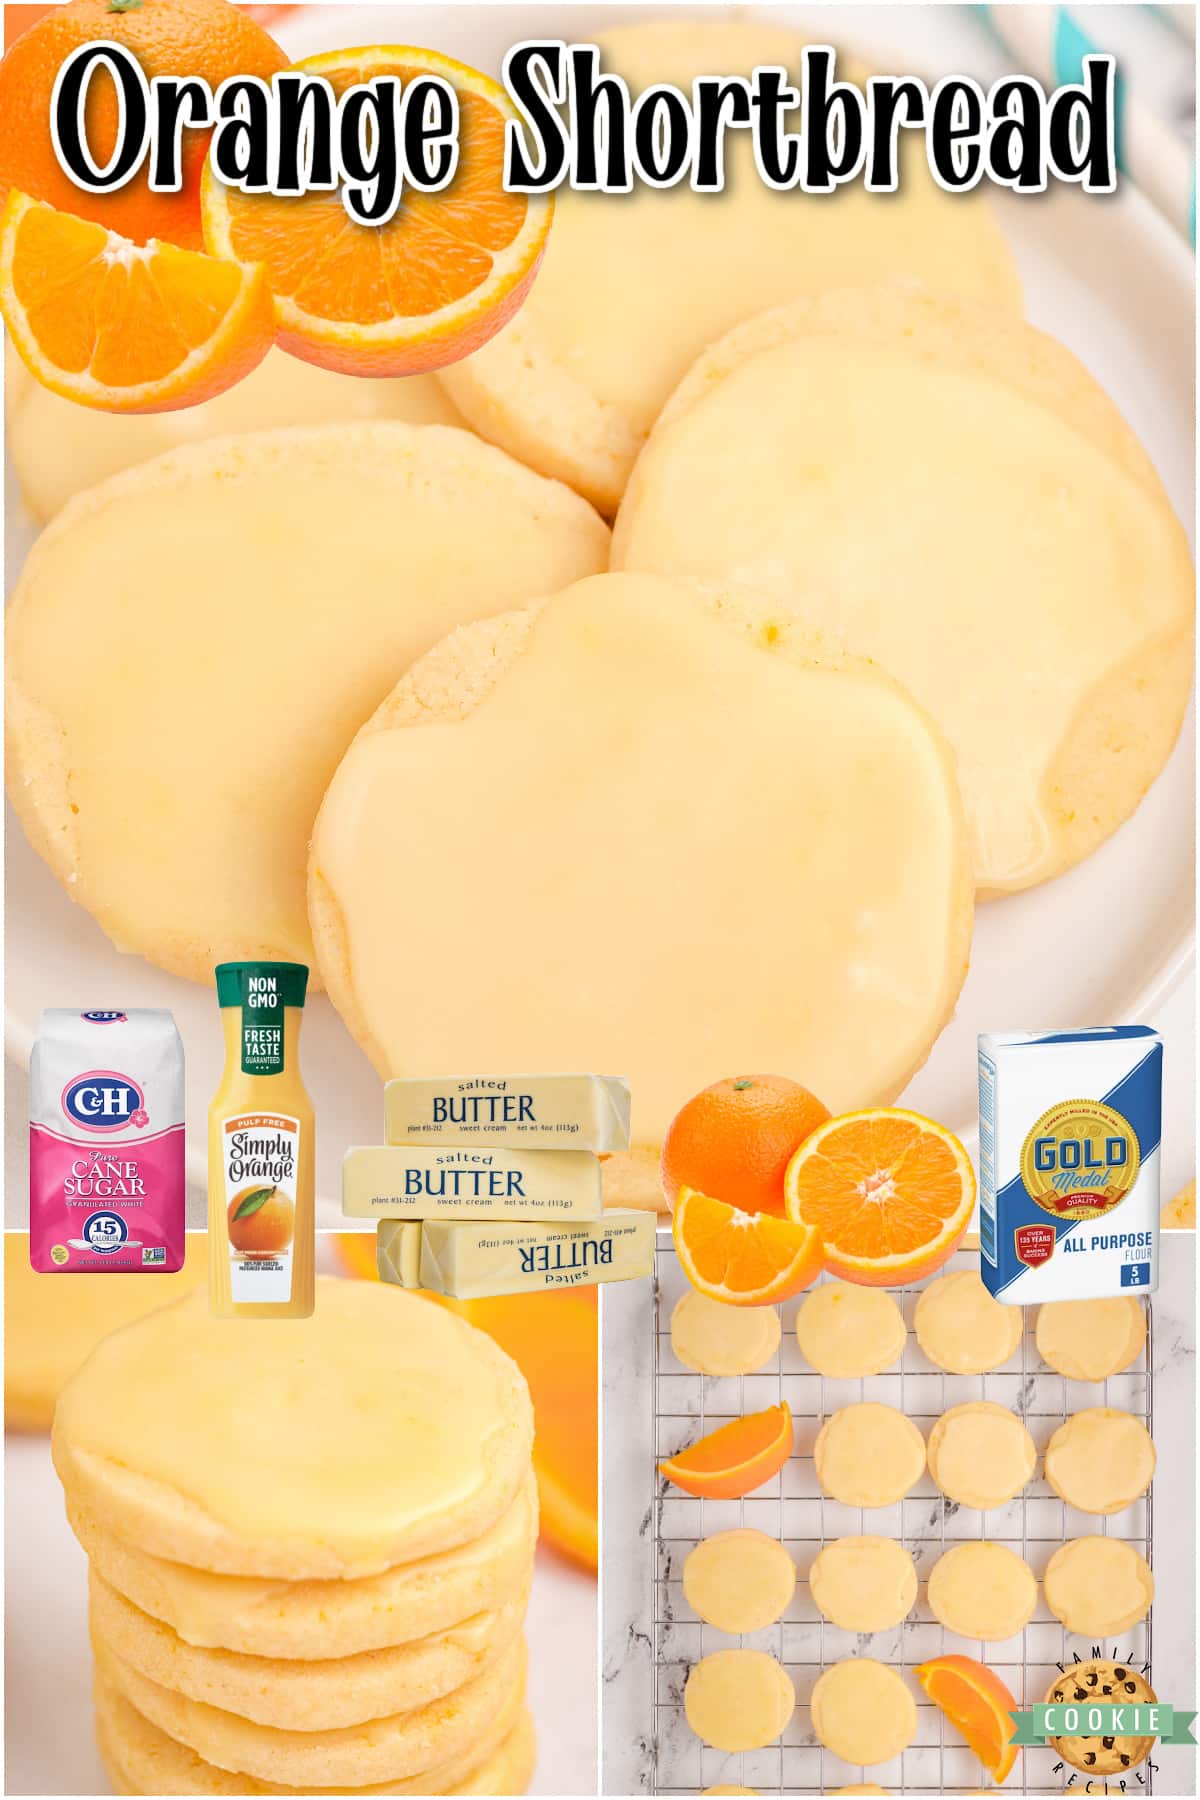 Orange shortbread cookies are a citrus-flavored buttery crisp cookies perfect for afternoon tea. Enjoy these cookies any time of day, as they're sure to brighten it up!